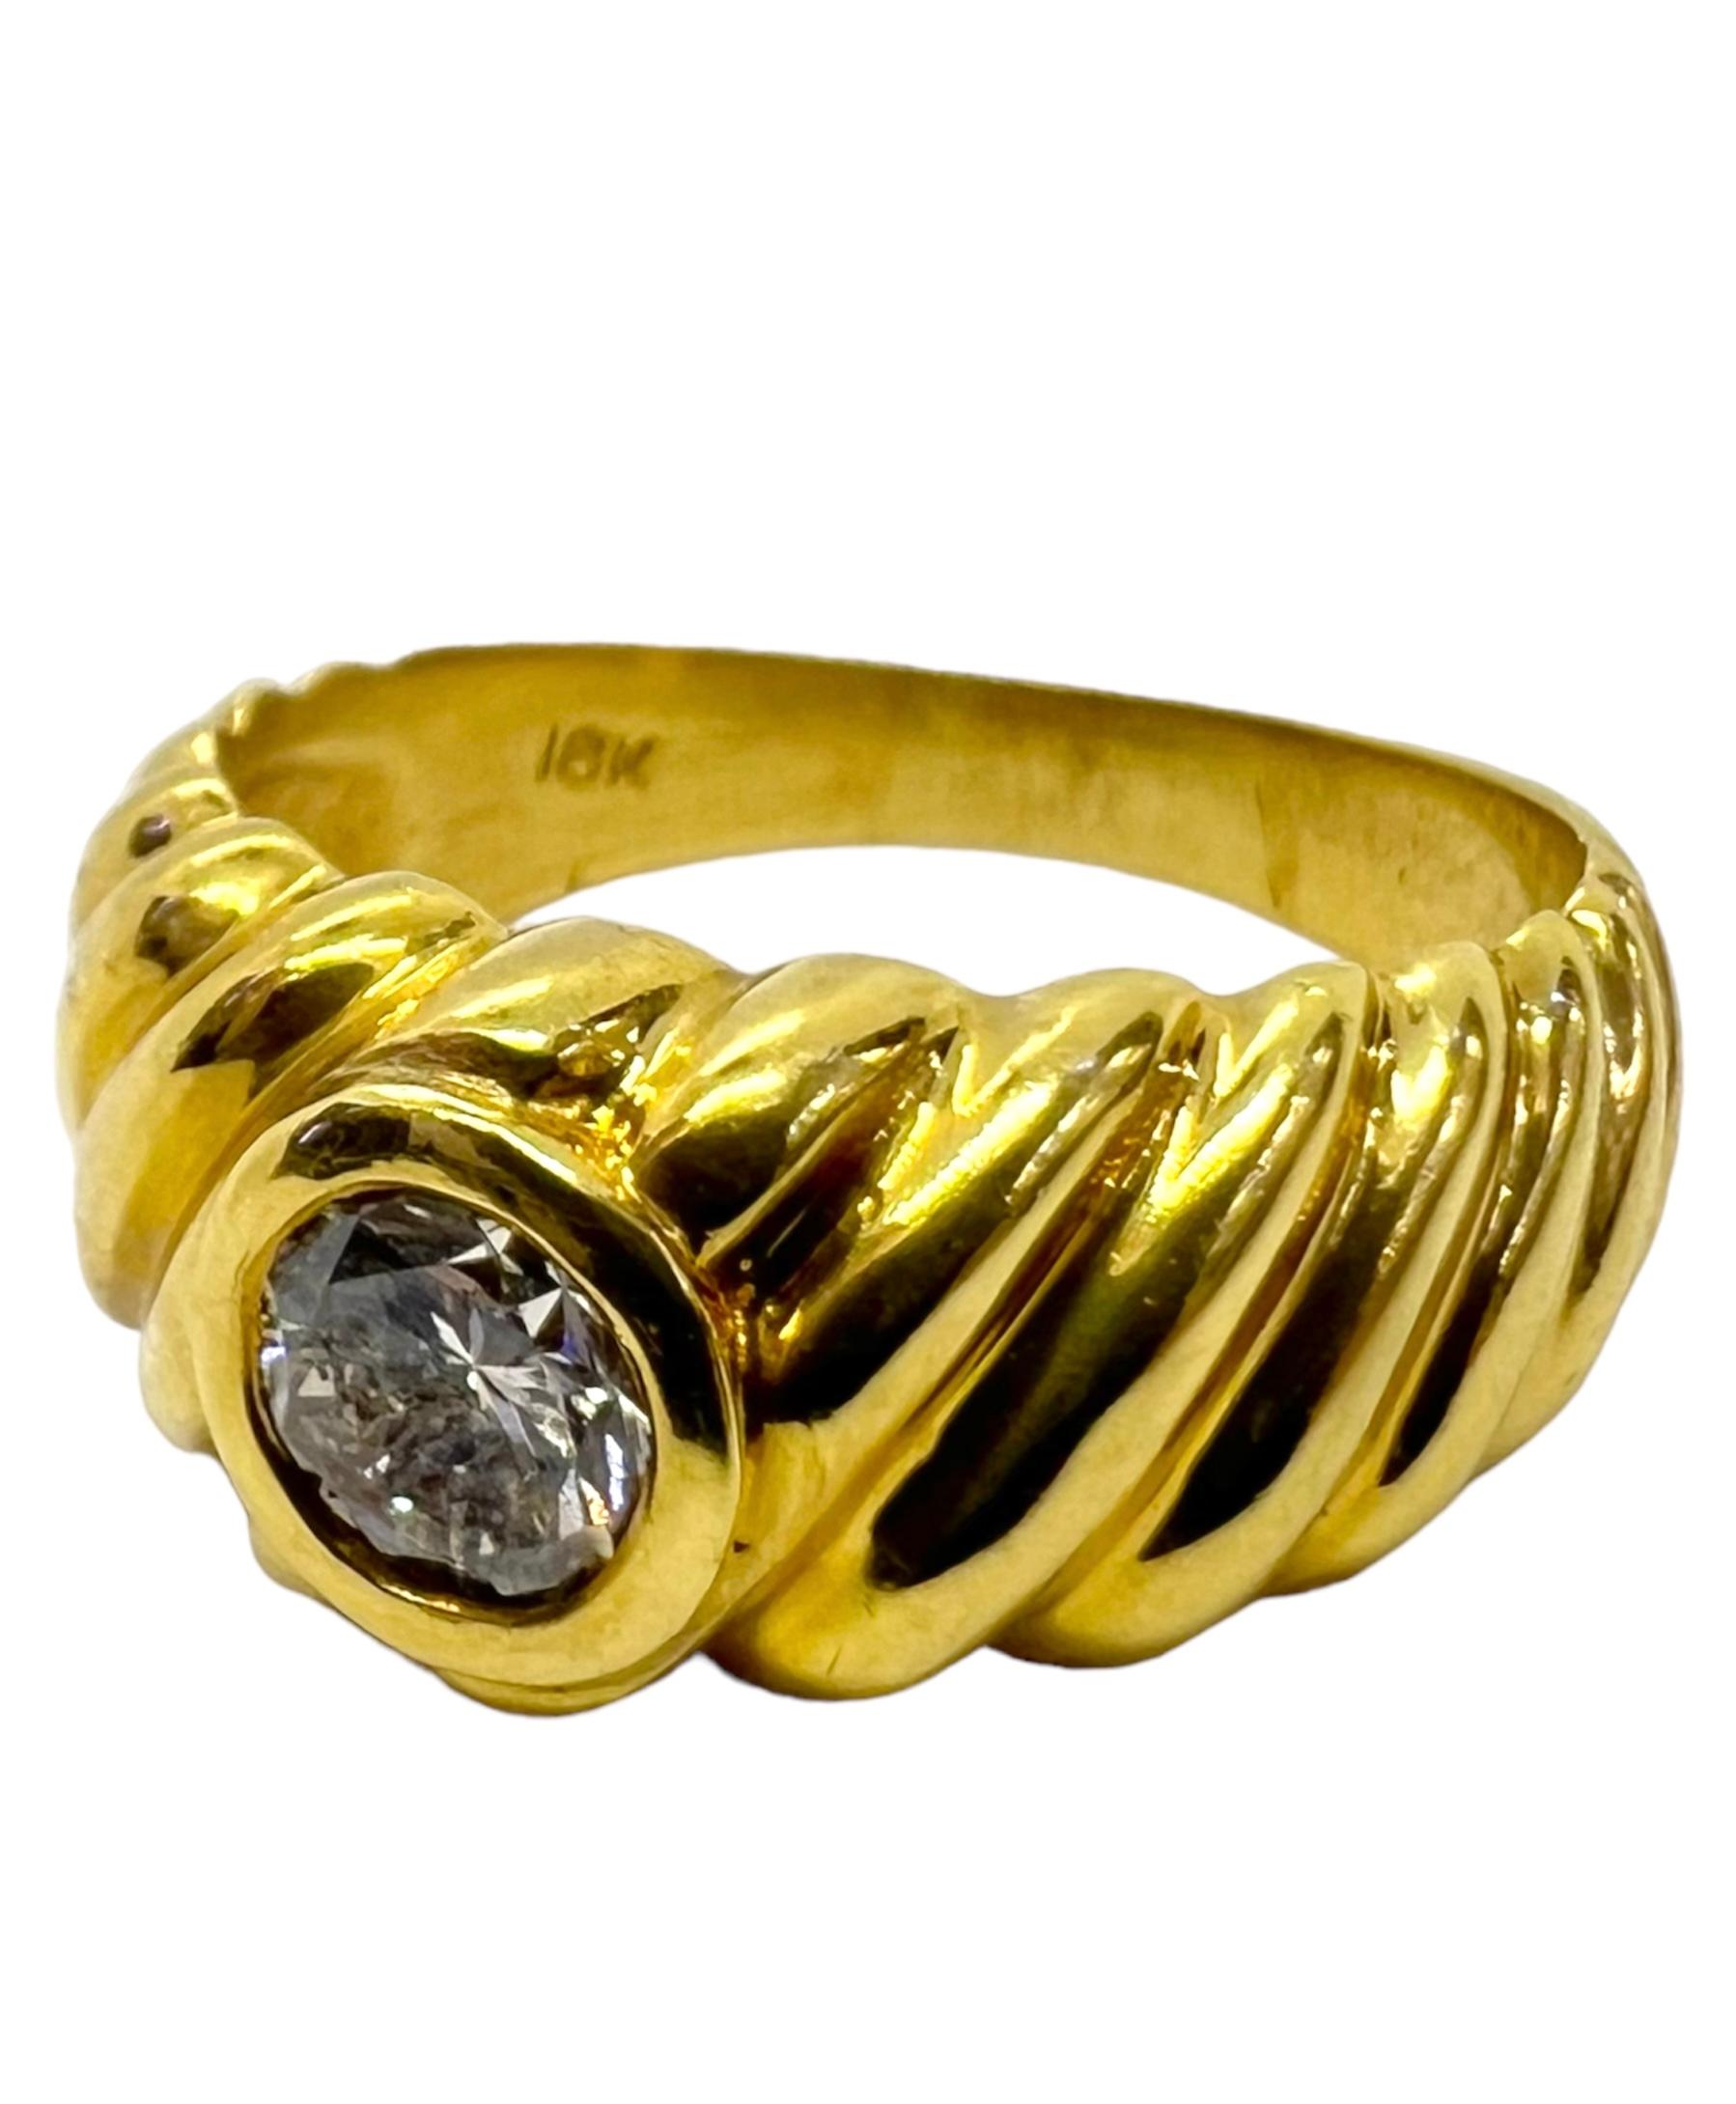 18K yellow gold ring with 0.46 carat round diamond.

Sophia D by Joseph Dardashti LTD has been known worldwide for 35 years and are inspired by classic Art Deco design that merges with modern manufacturing techniques.  